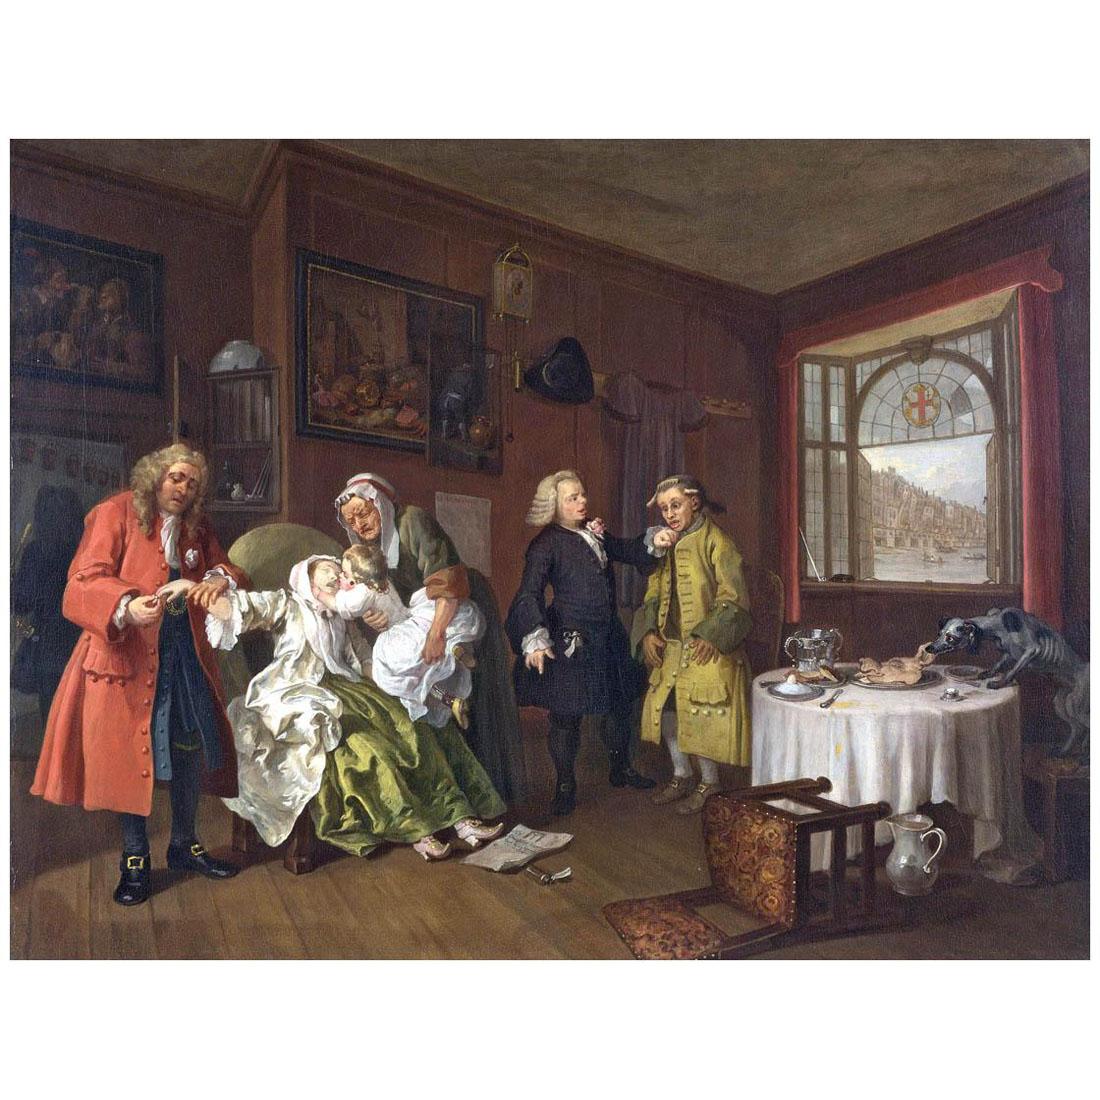 William Hogarth. Marriage A-la-Mode #4. The Toilette. 1743. National Gallery, London